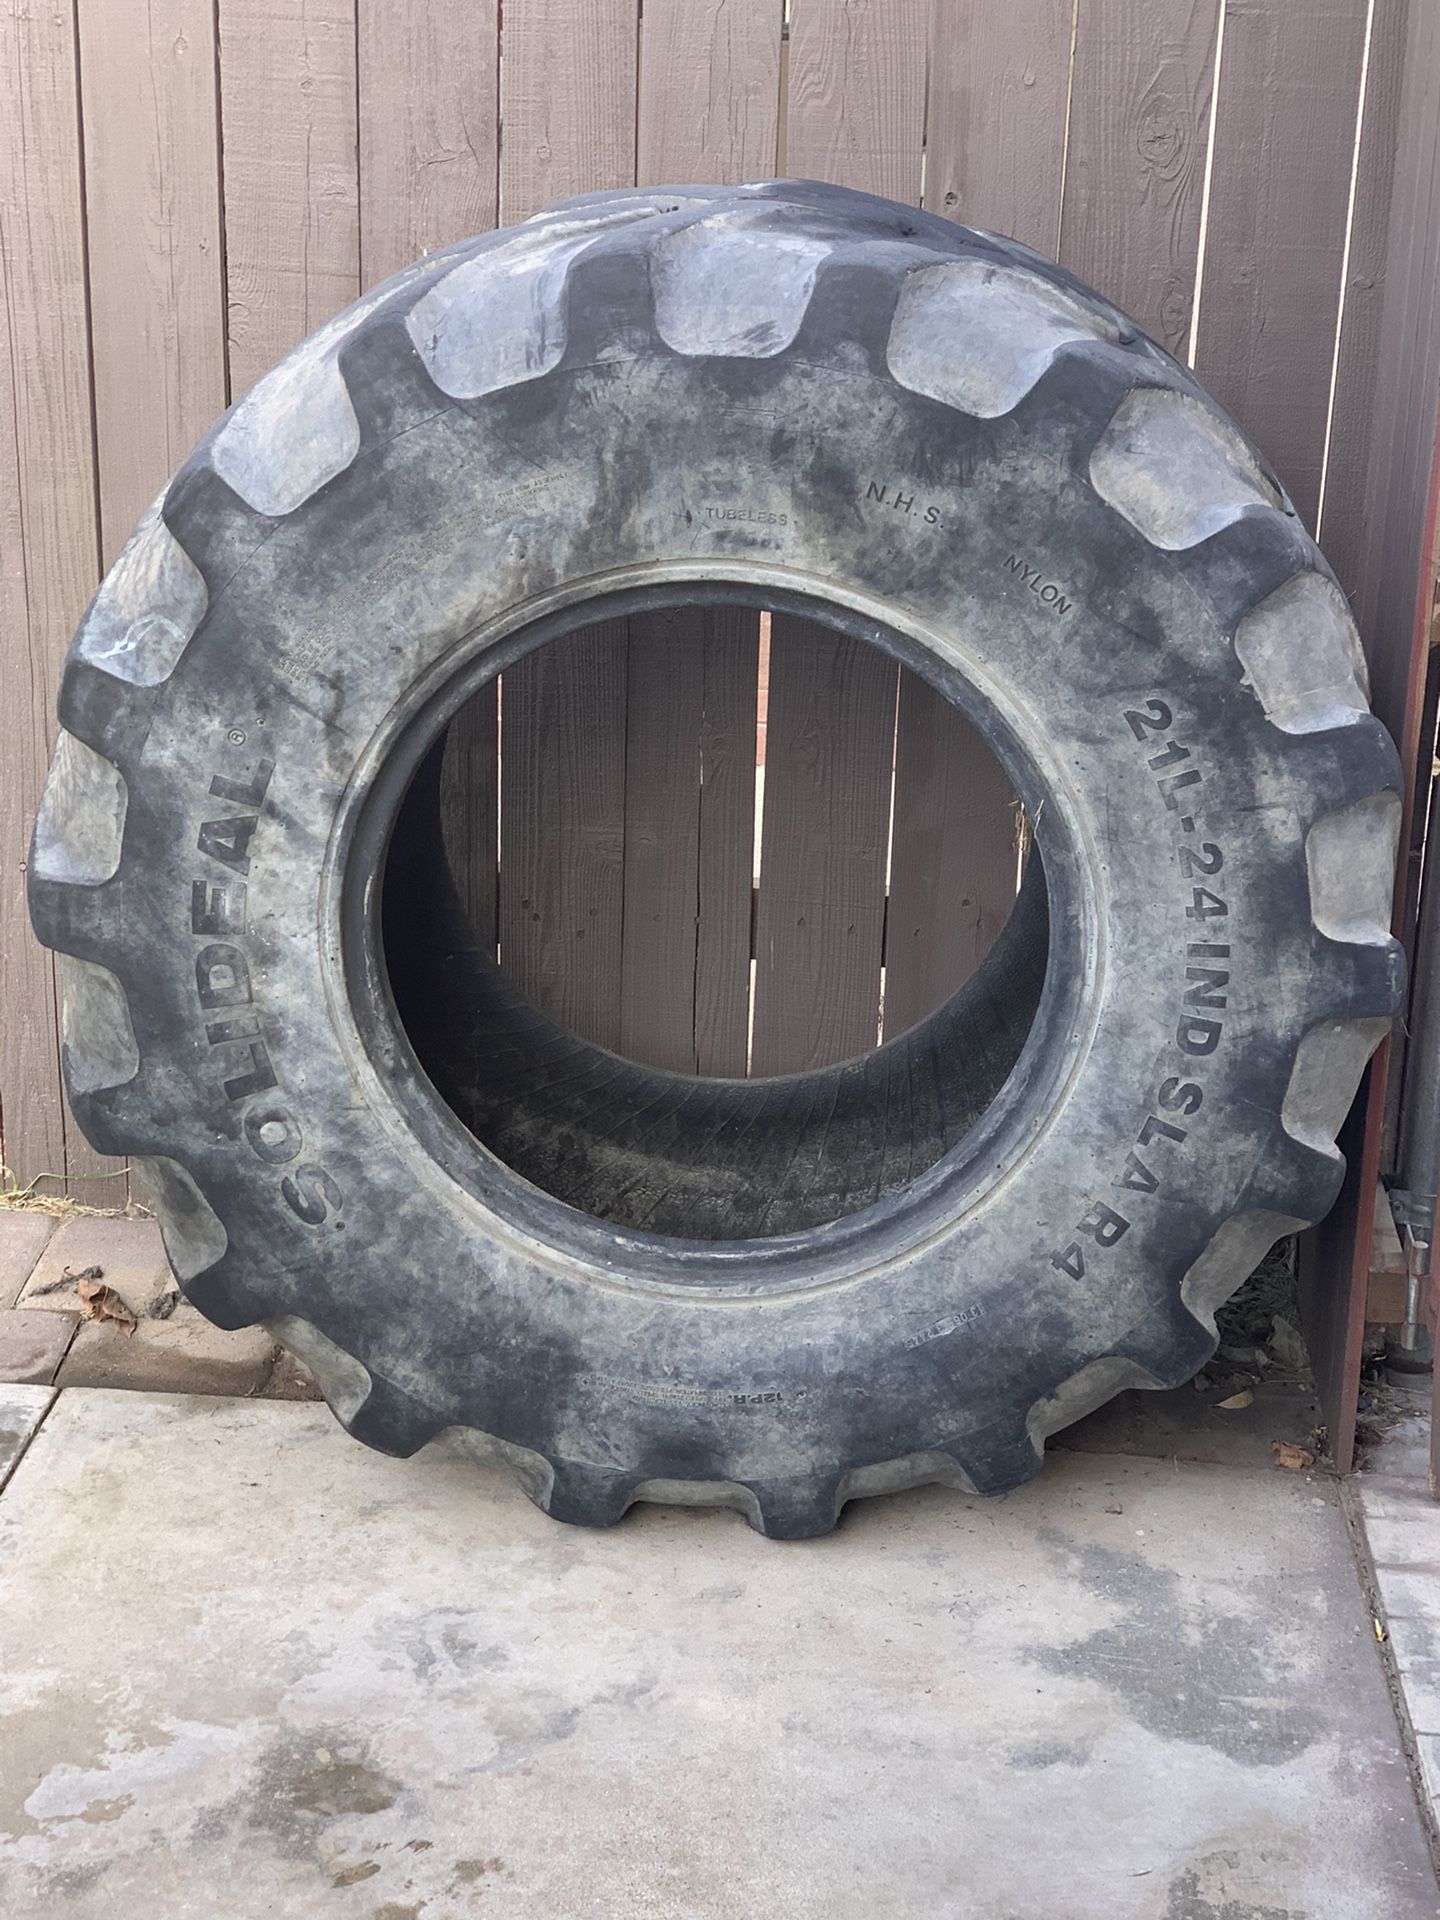 Backhoe Rear Tire Good For Work Out